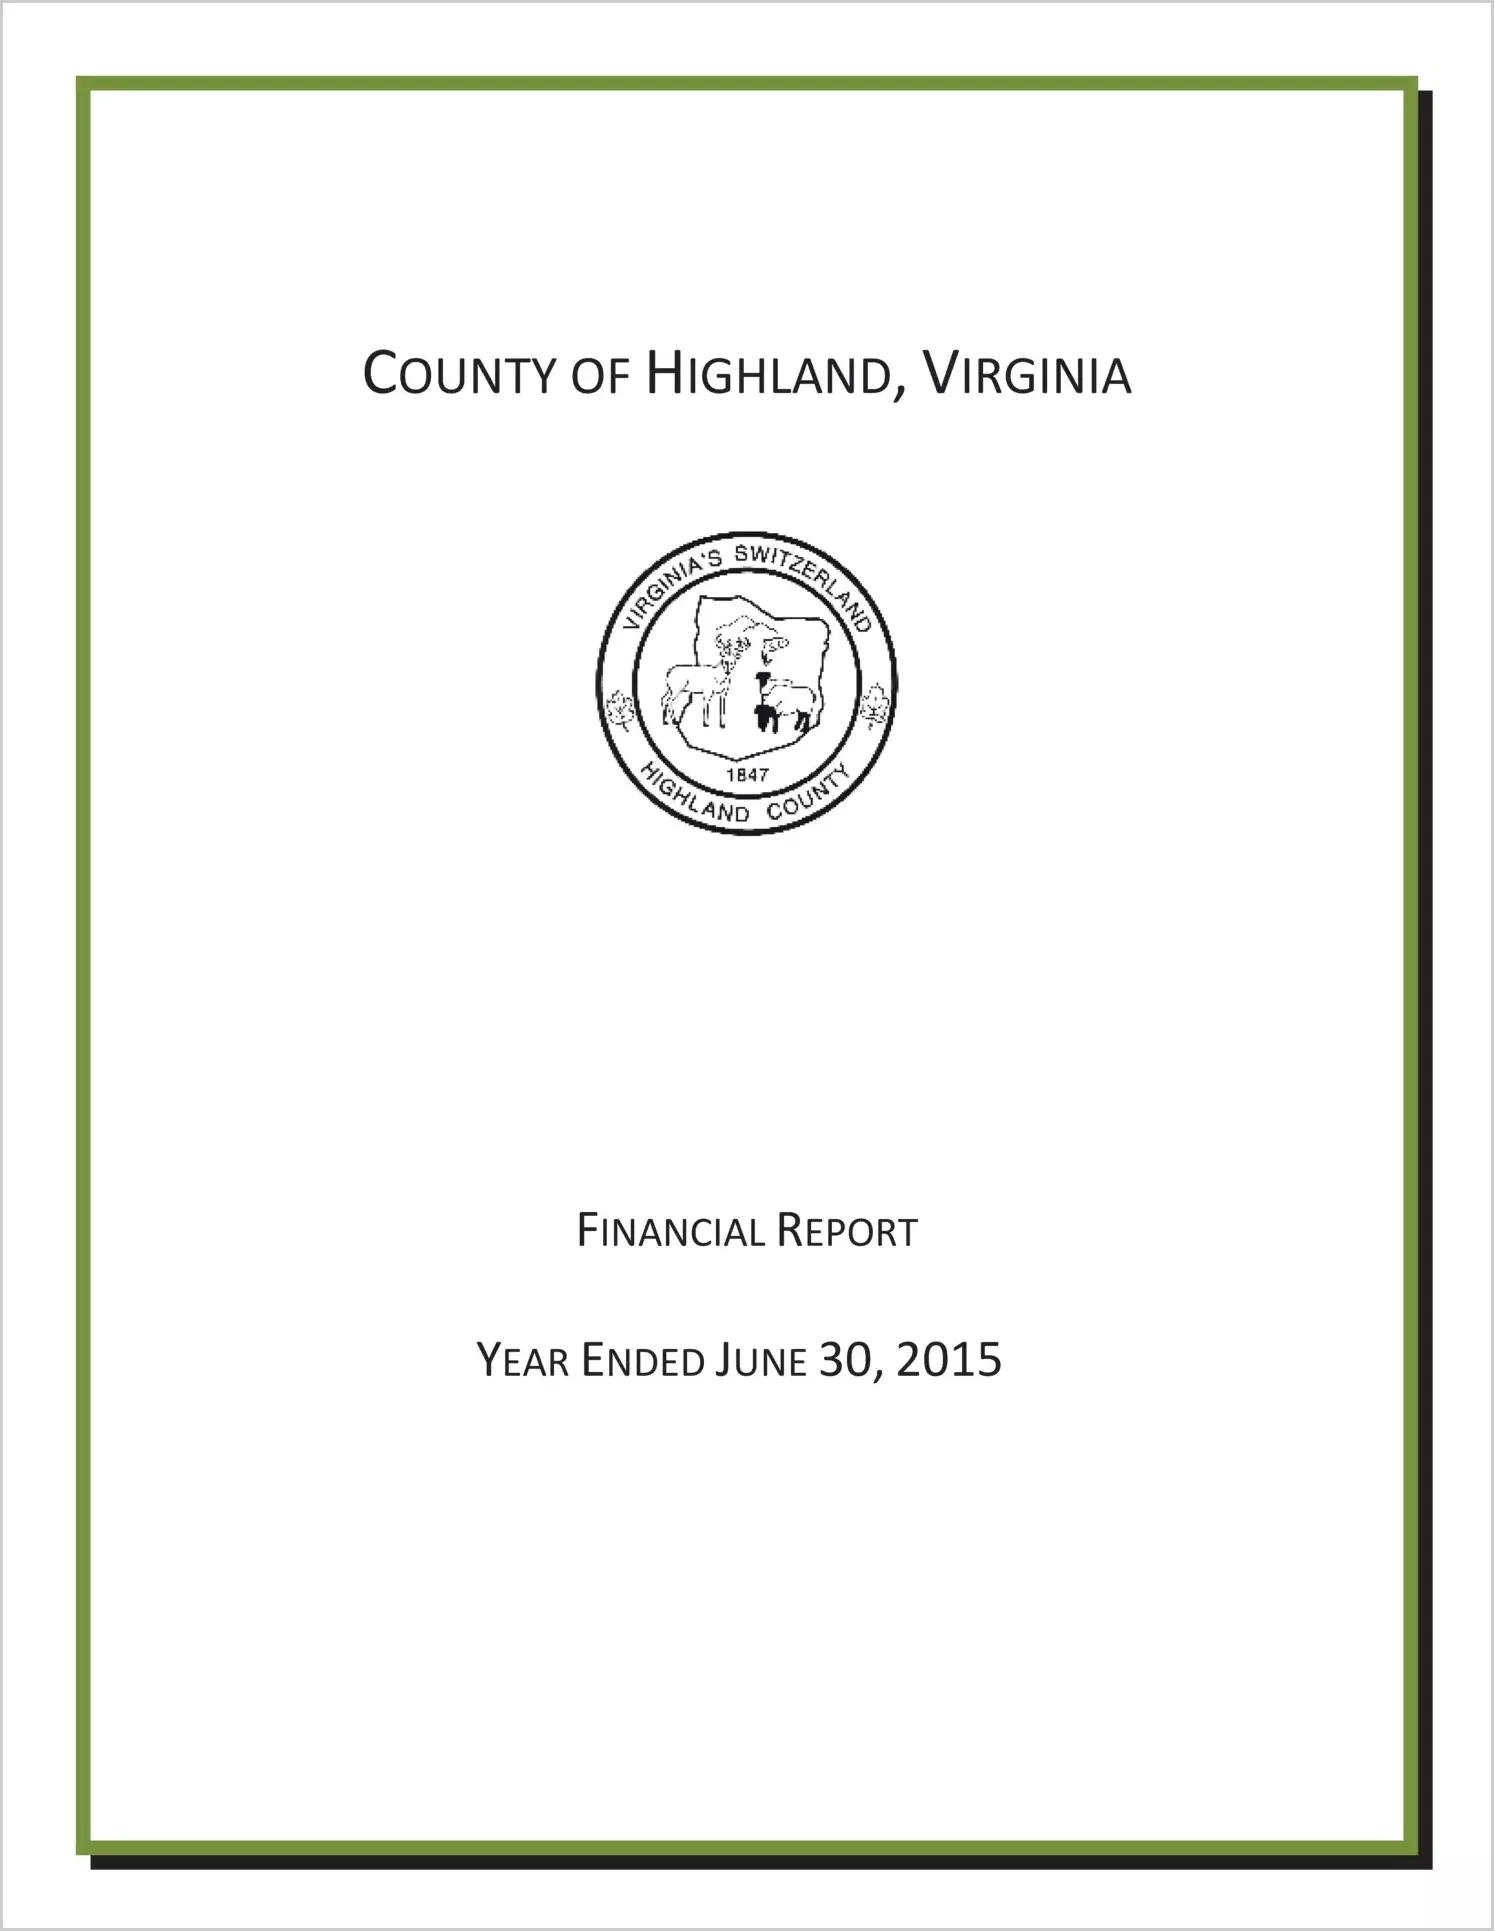 2015 Annual Financial Report for County of Highland